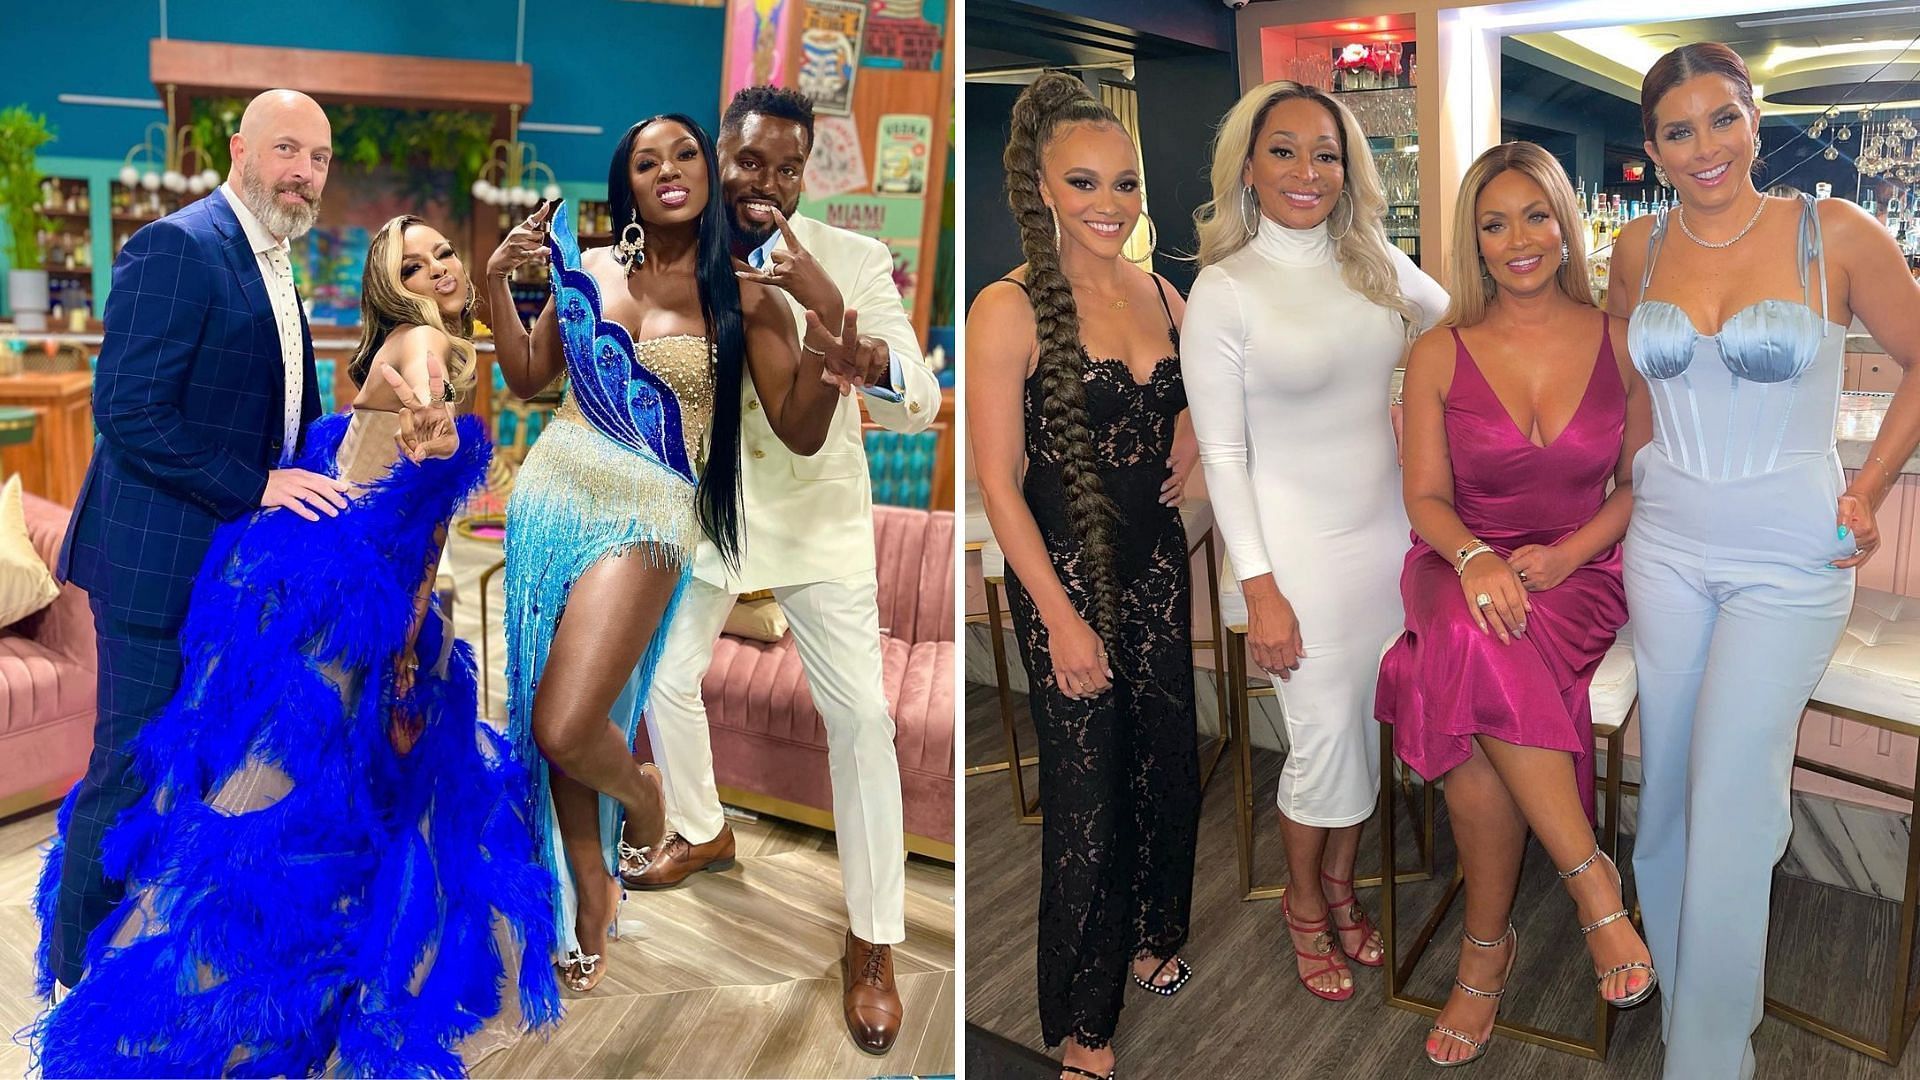 Candiace addresses her concerns towards Gizelle on RHOP